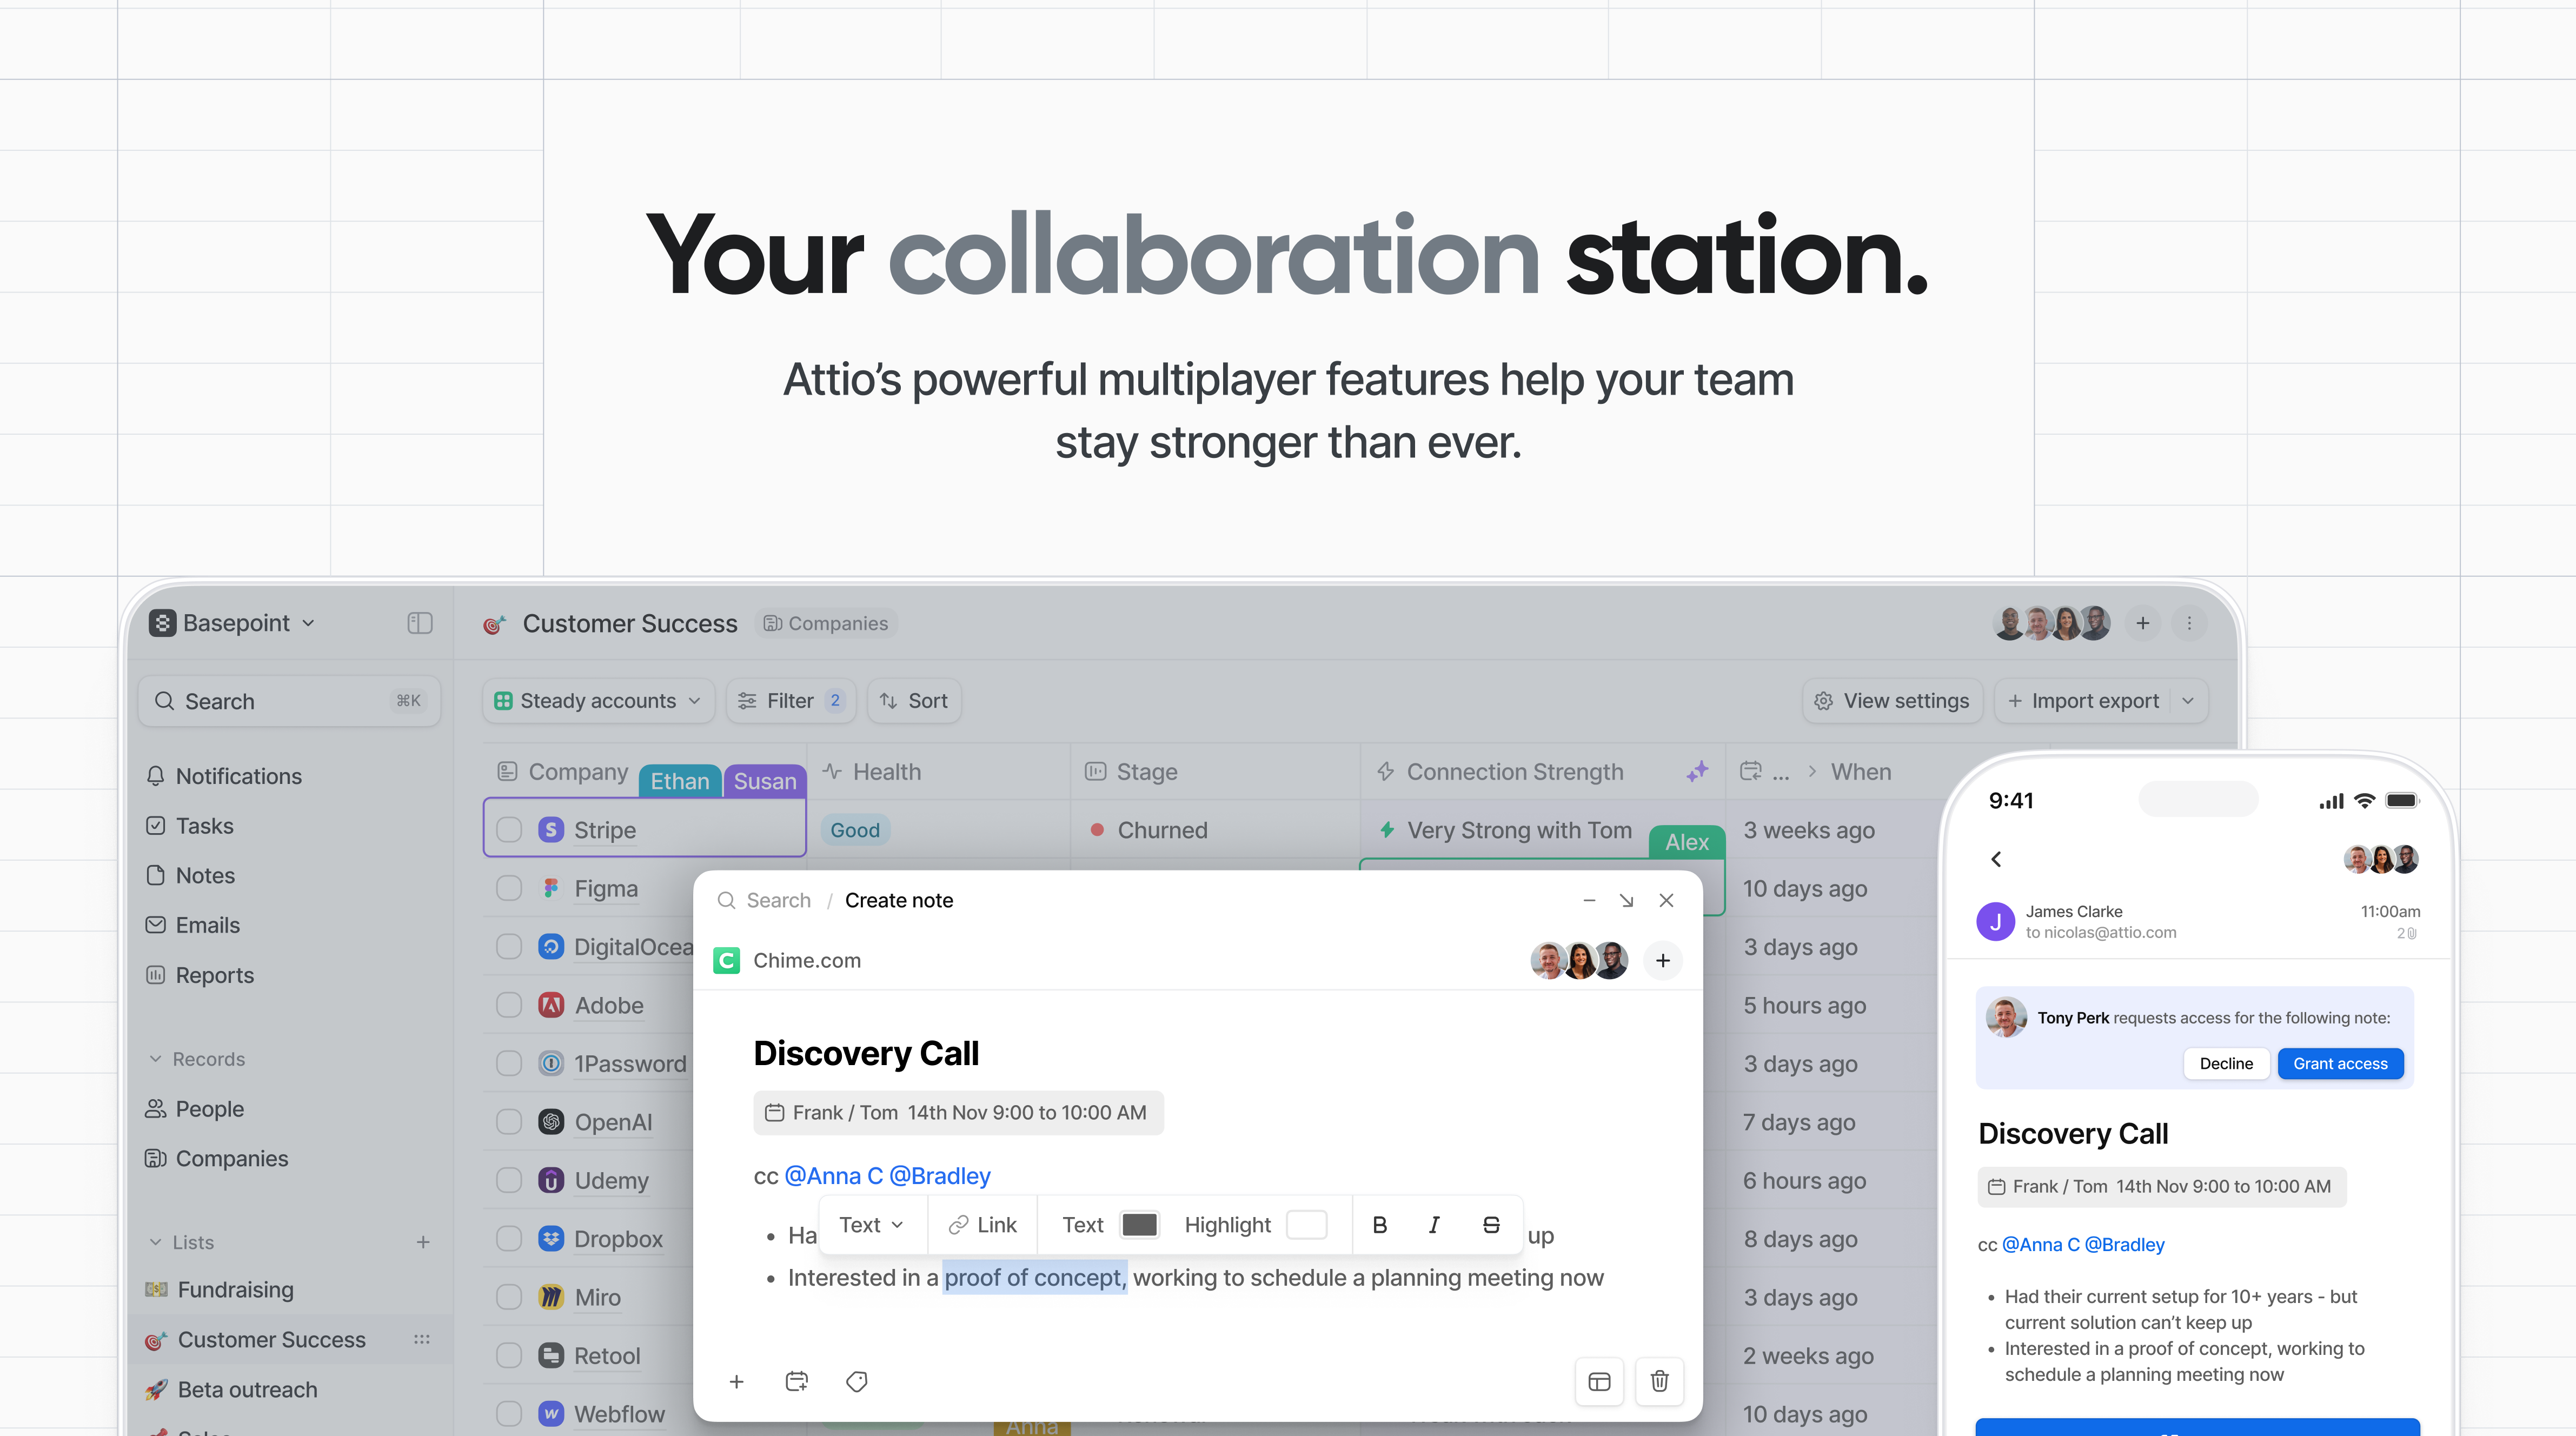 Your collaboration station: Attio’s powerful multiplayer features help your team stay stronger than ever.